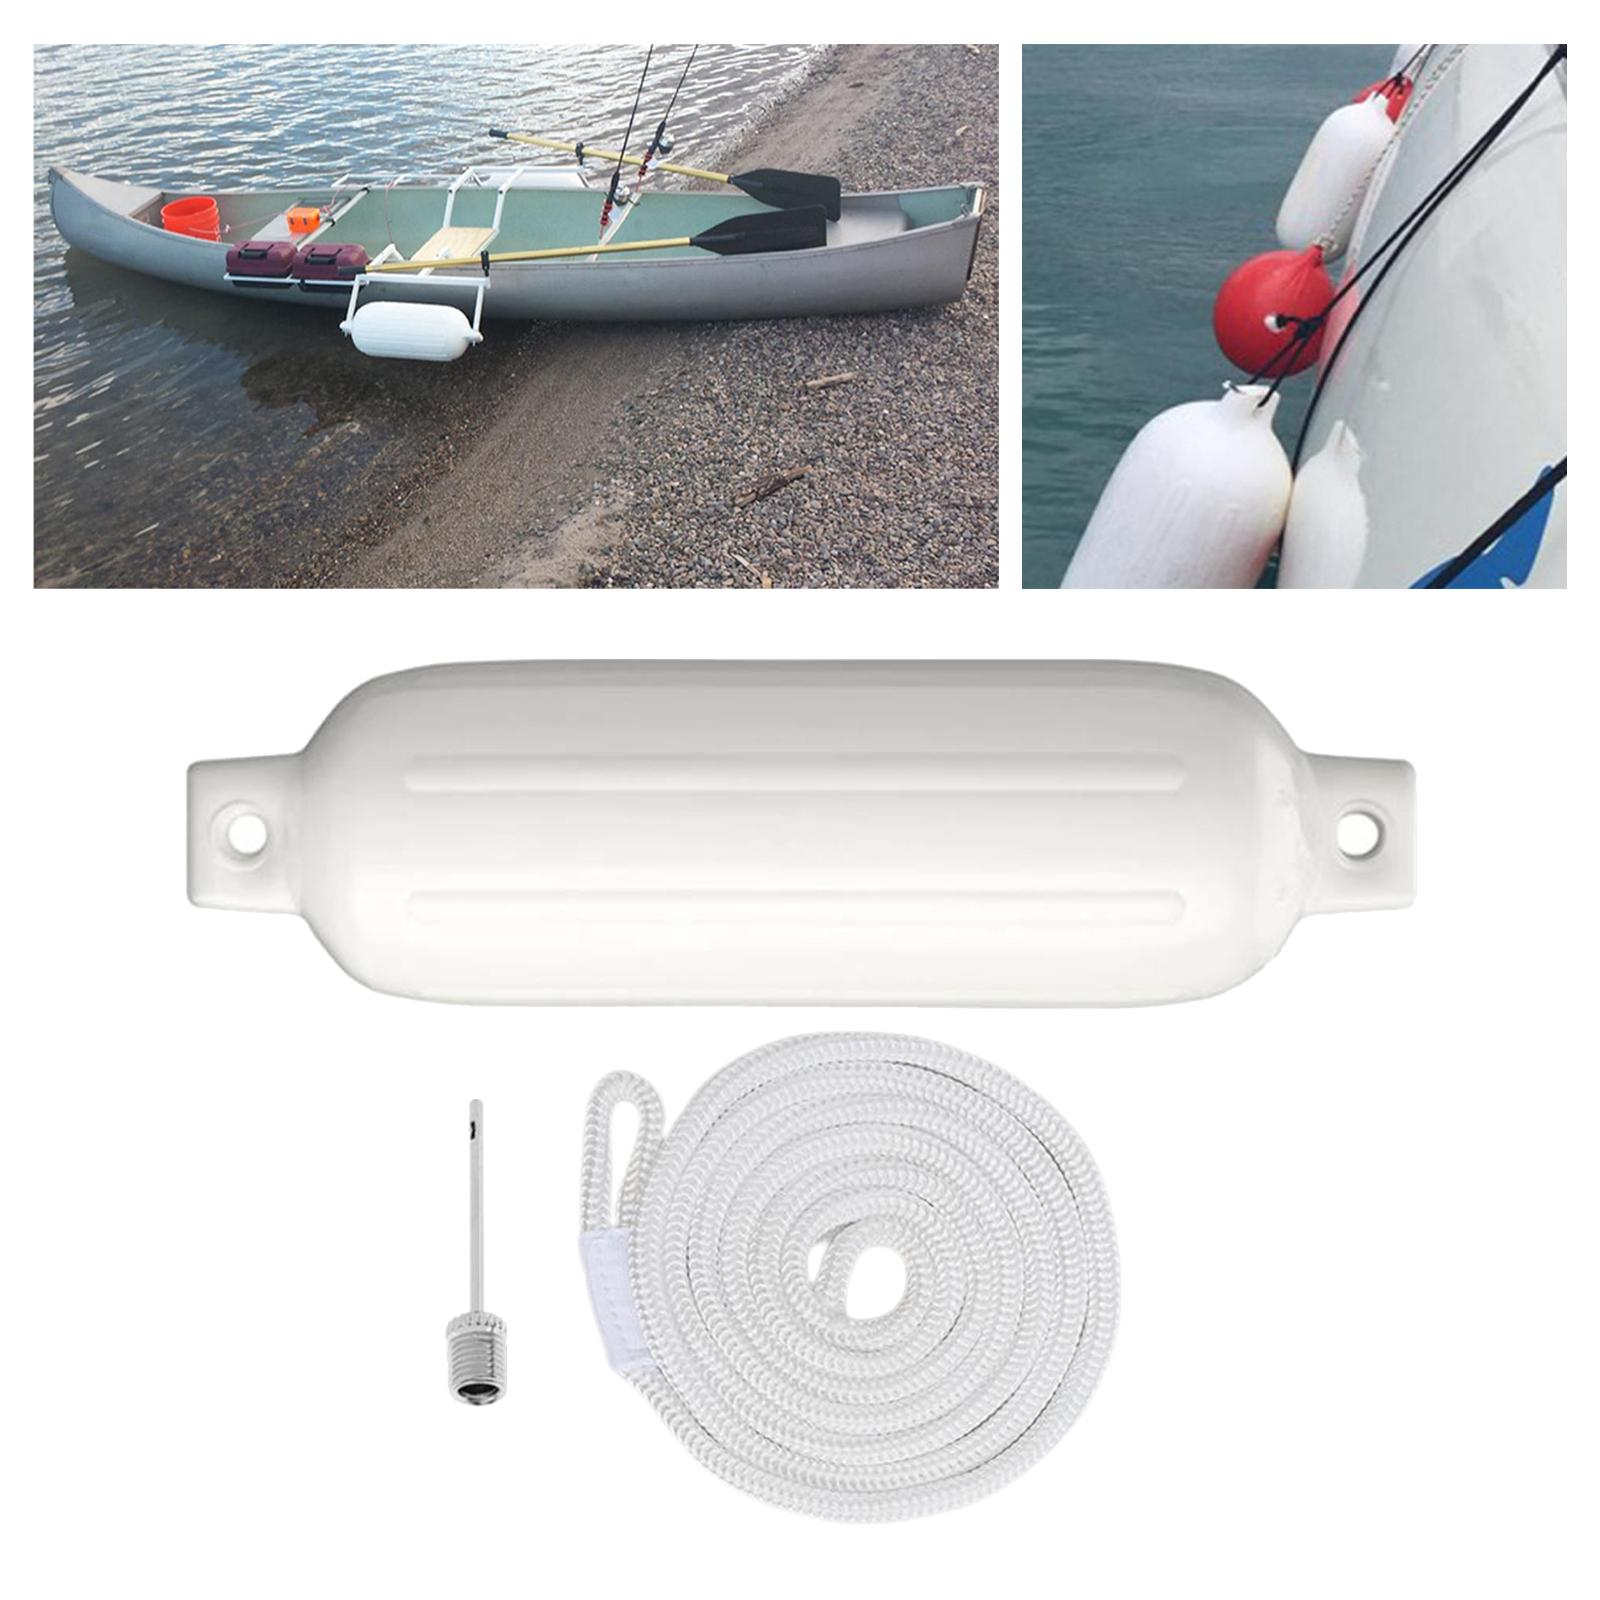 Boats Fender Bumper Shield Protection Sailboats for Pontoon Boat Marine Dock White Rope White 